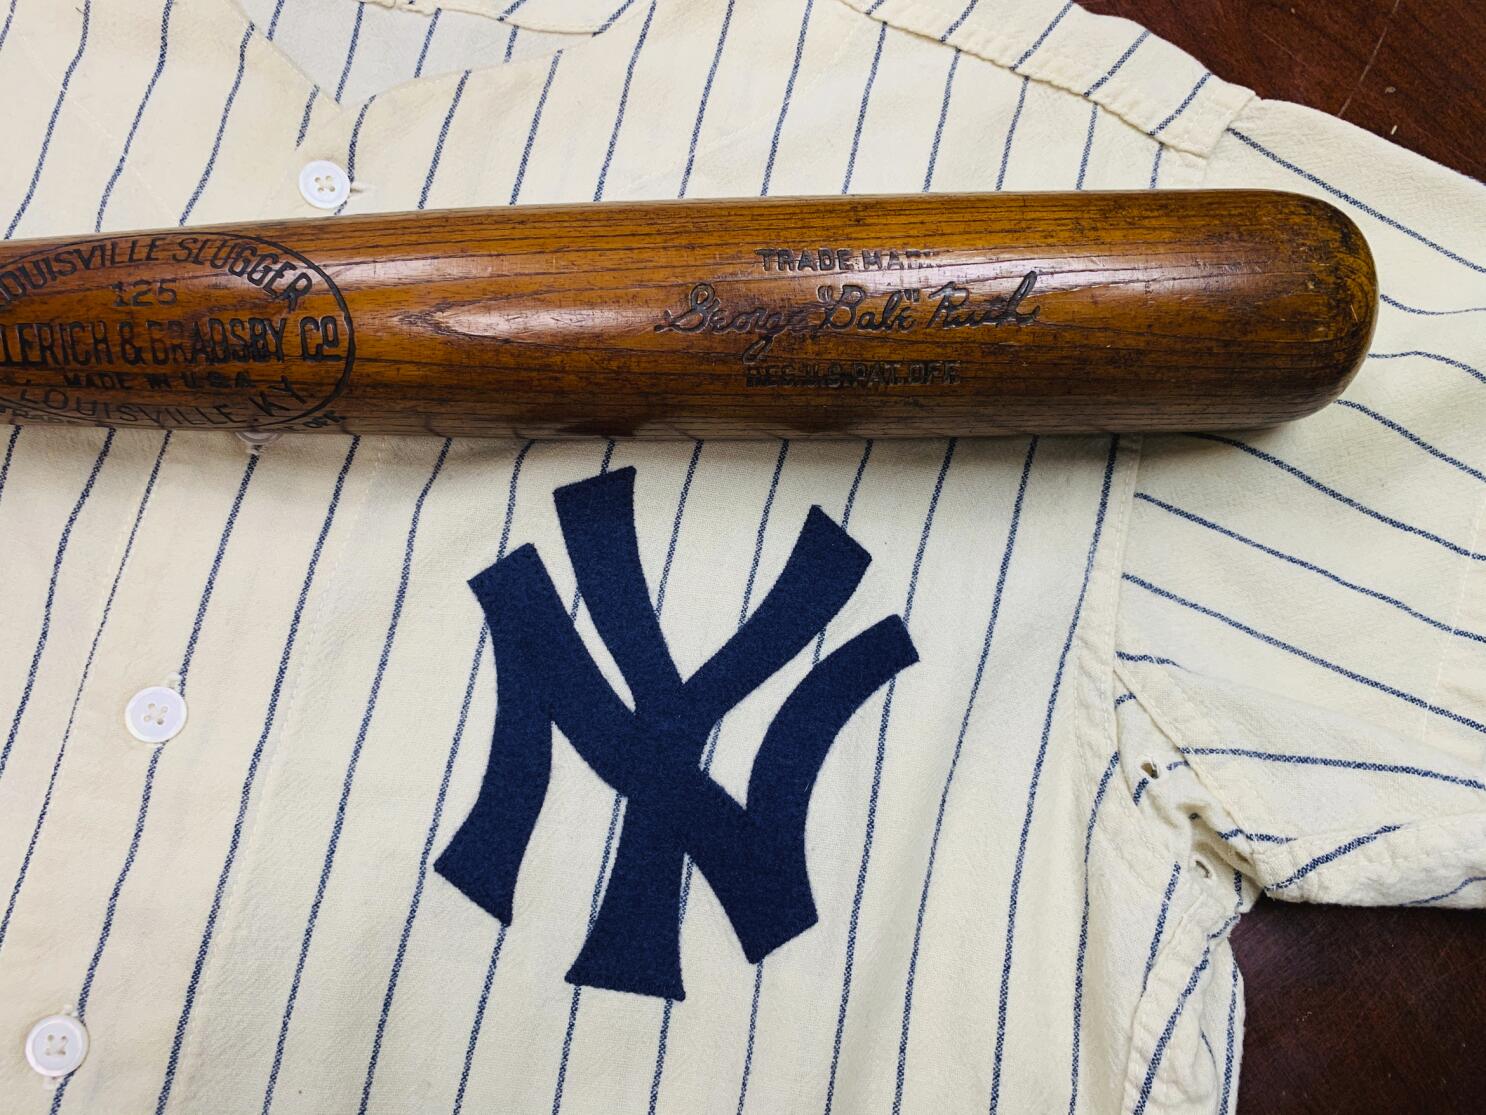 Babe Ruth's bat used for 500th home run sold for $1 million at